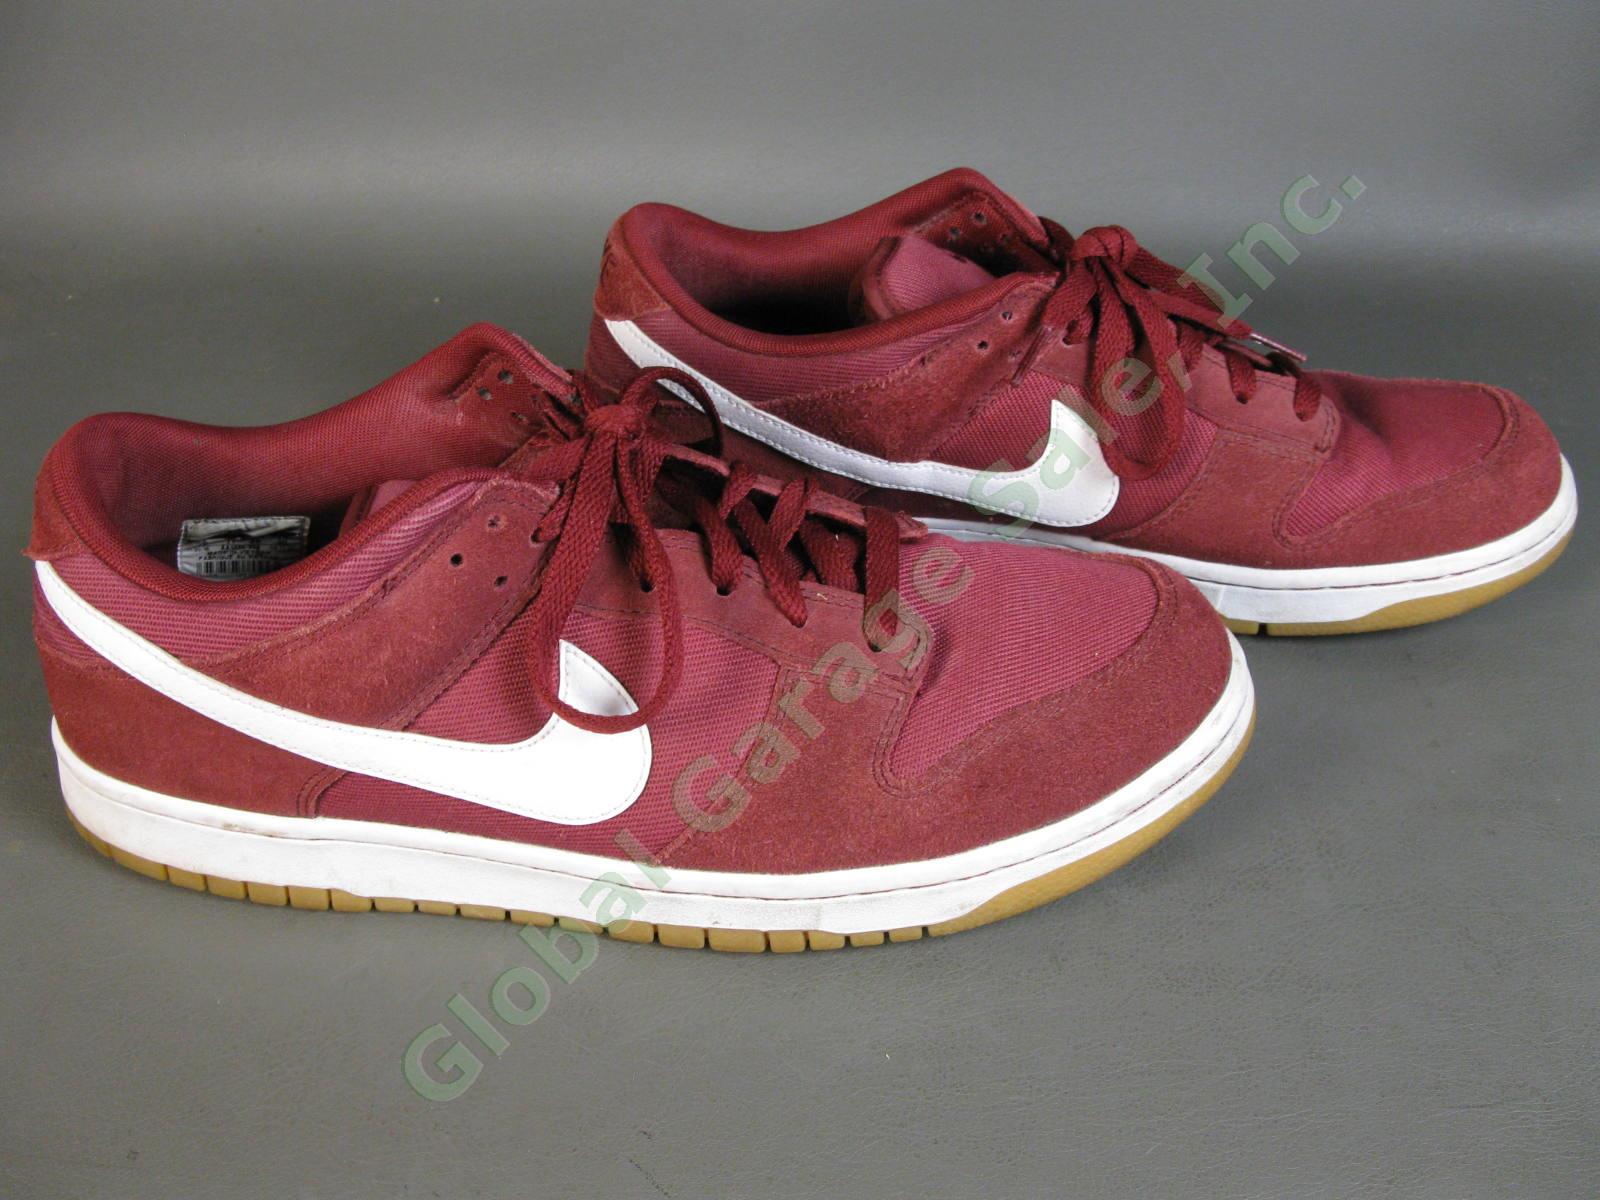 Nike Dunk Low Team Red White Sneaker Shoes AA1056-600 Canvas Burgundy Excellent 2